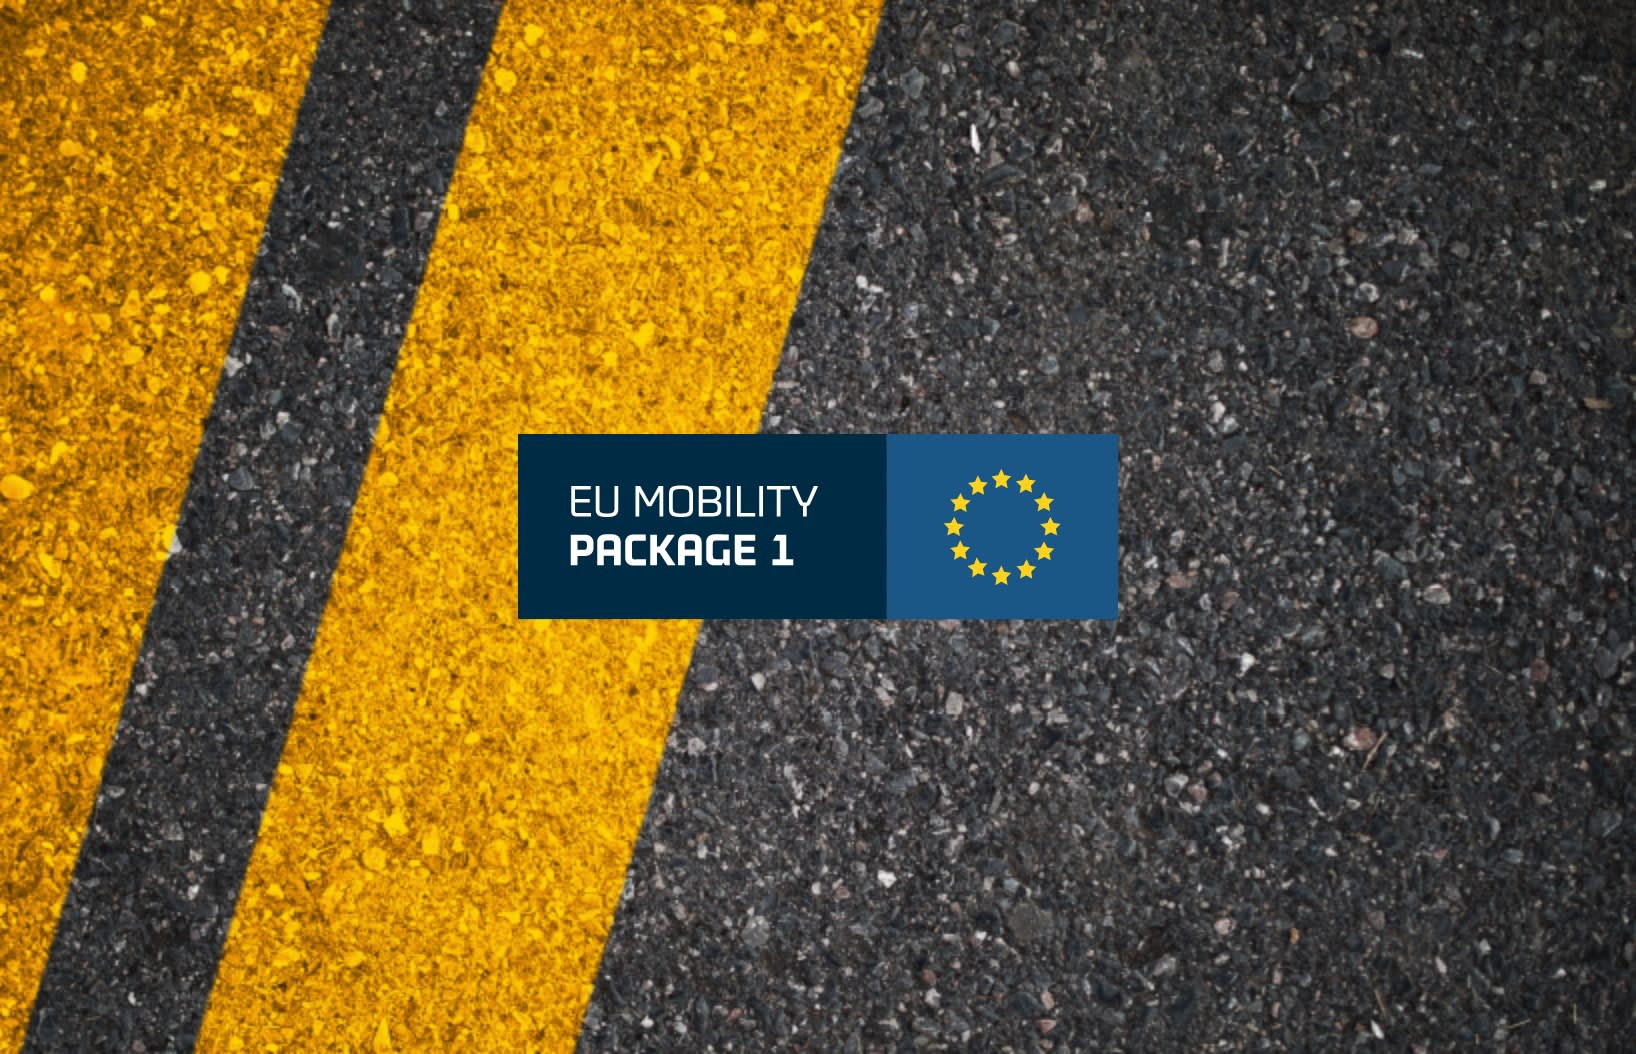 EU mobility package 1 - Group 6475@2x